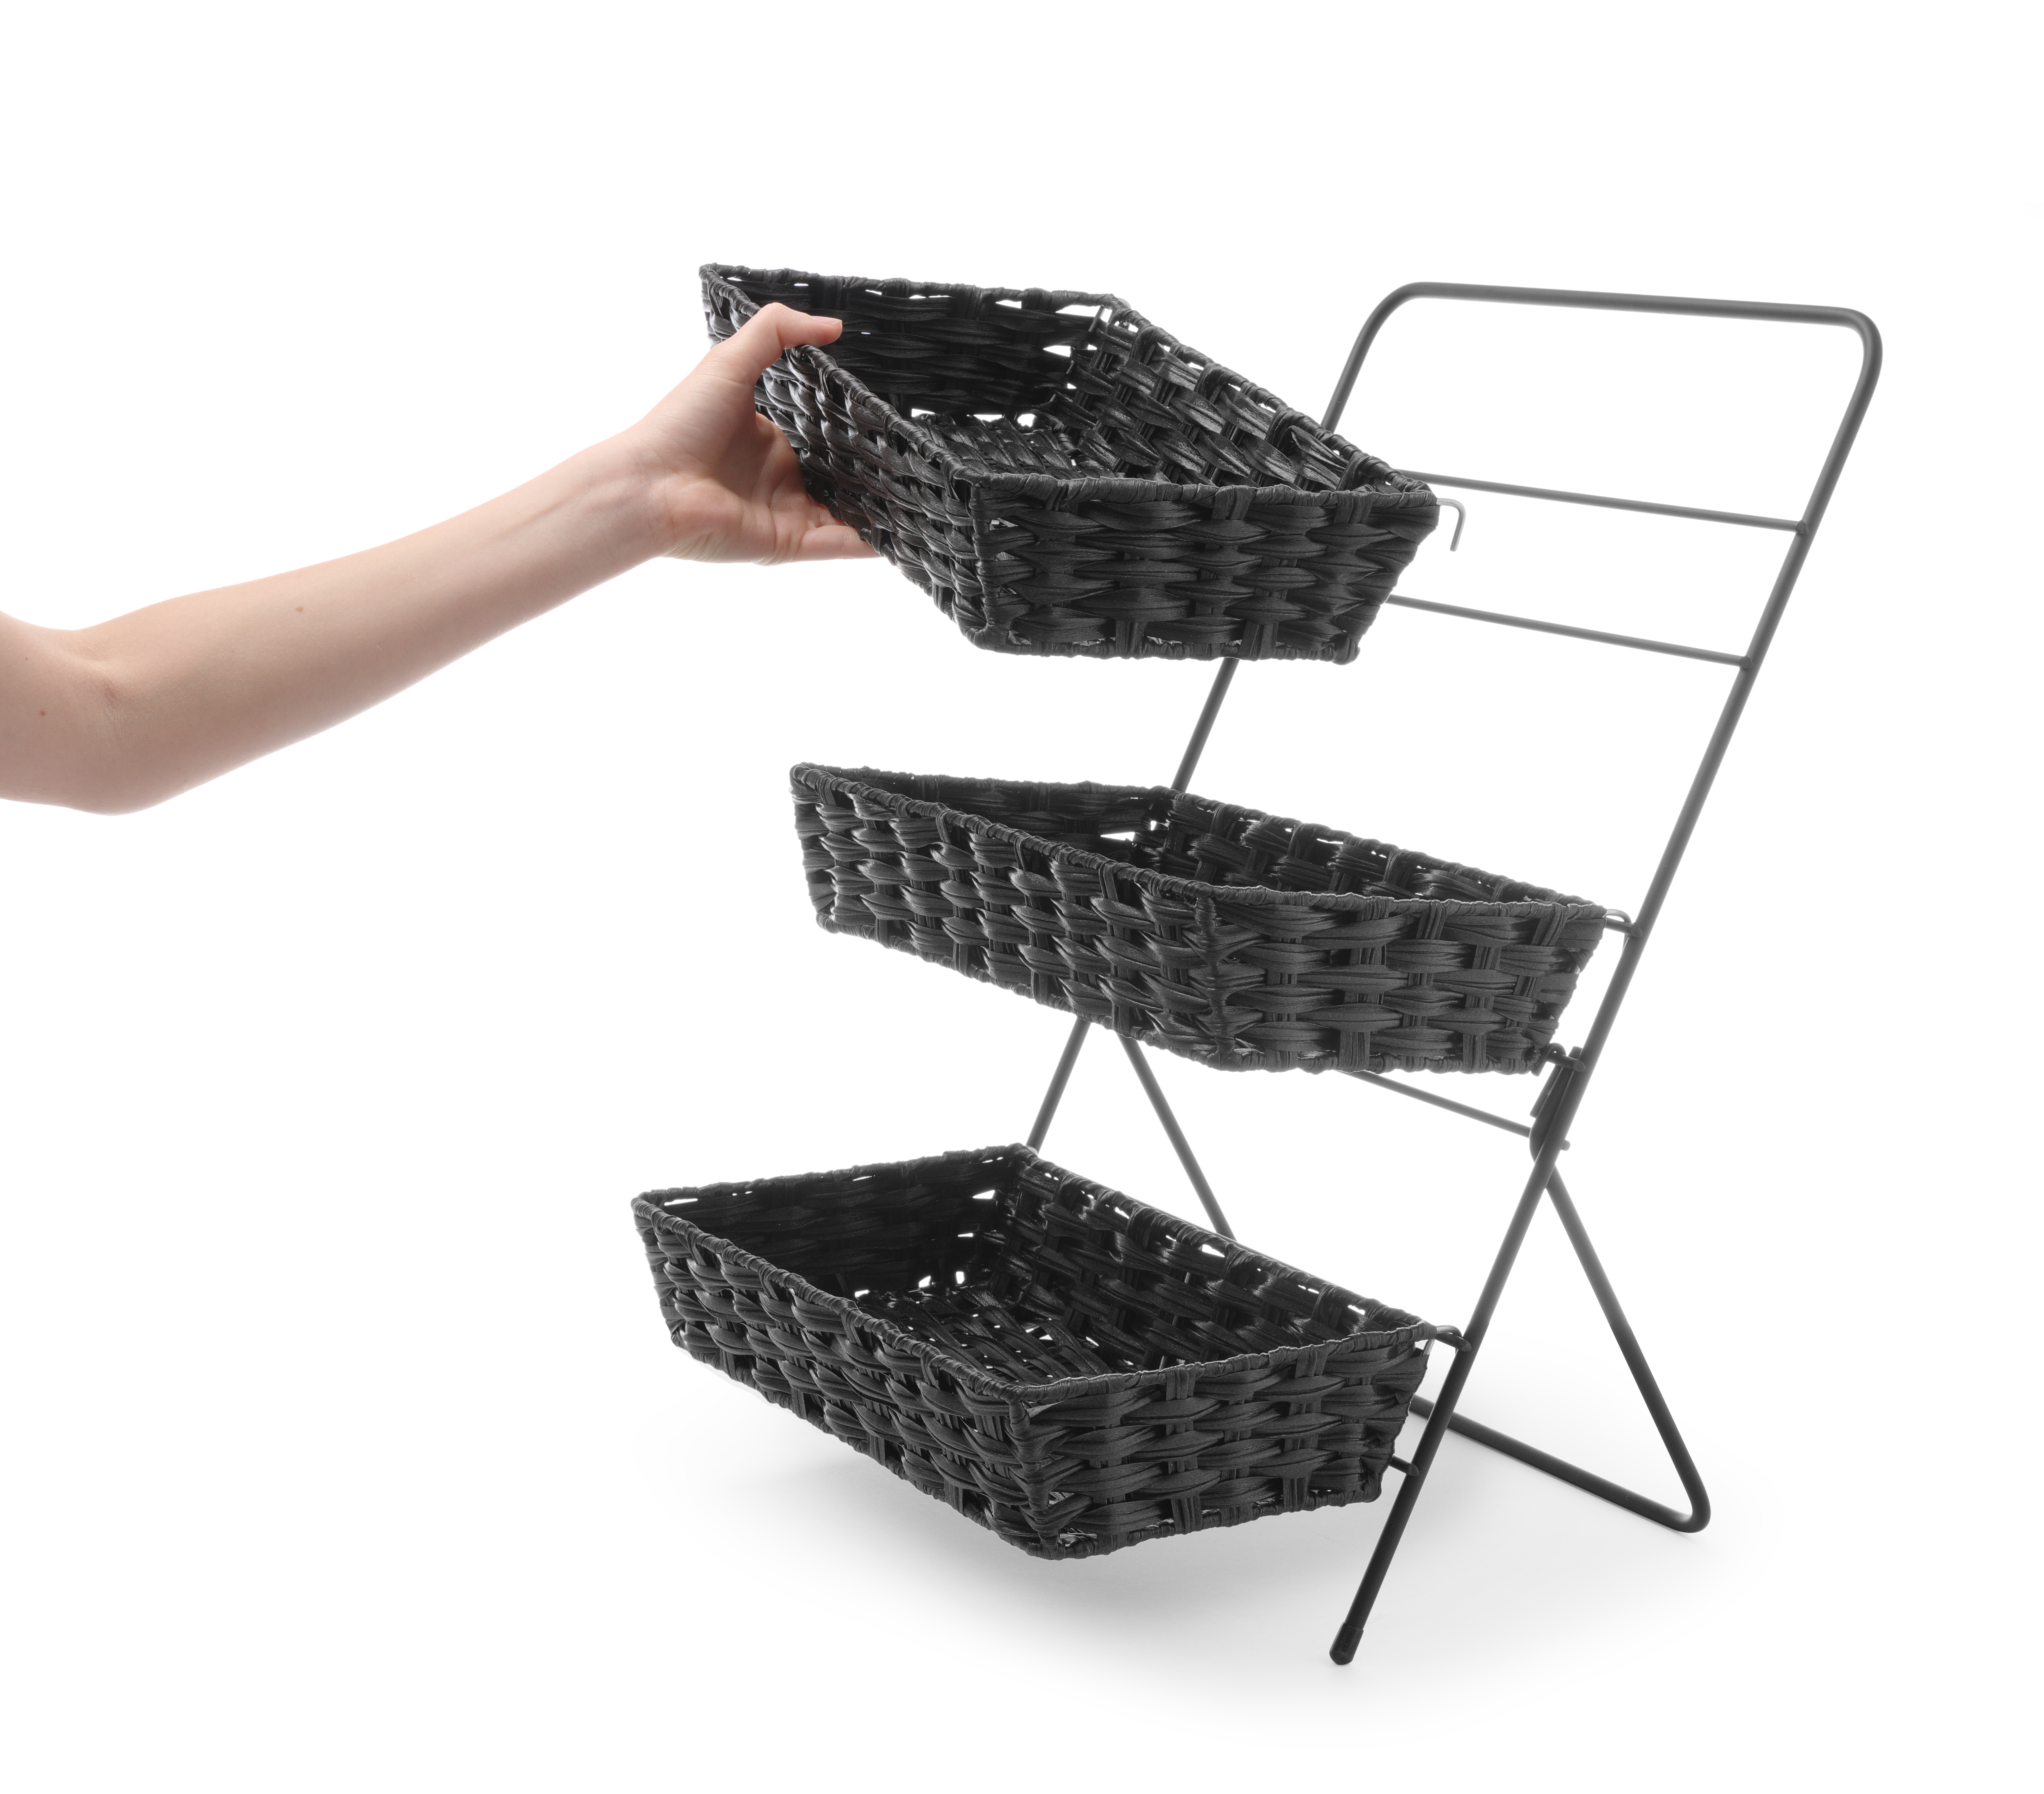 0031-piece set 1 - basket + brackets COM-FOUR® 30x clothespins in practical basket with handle 